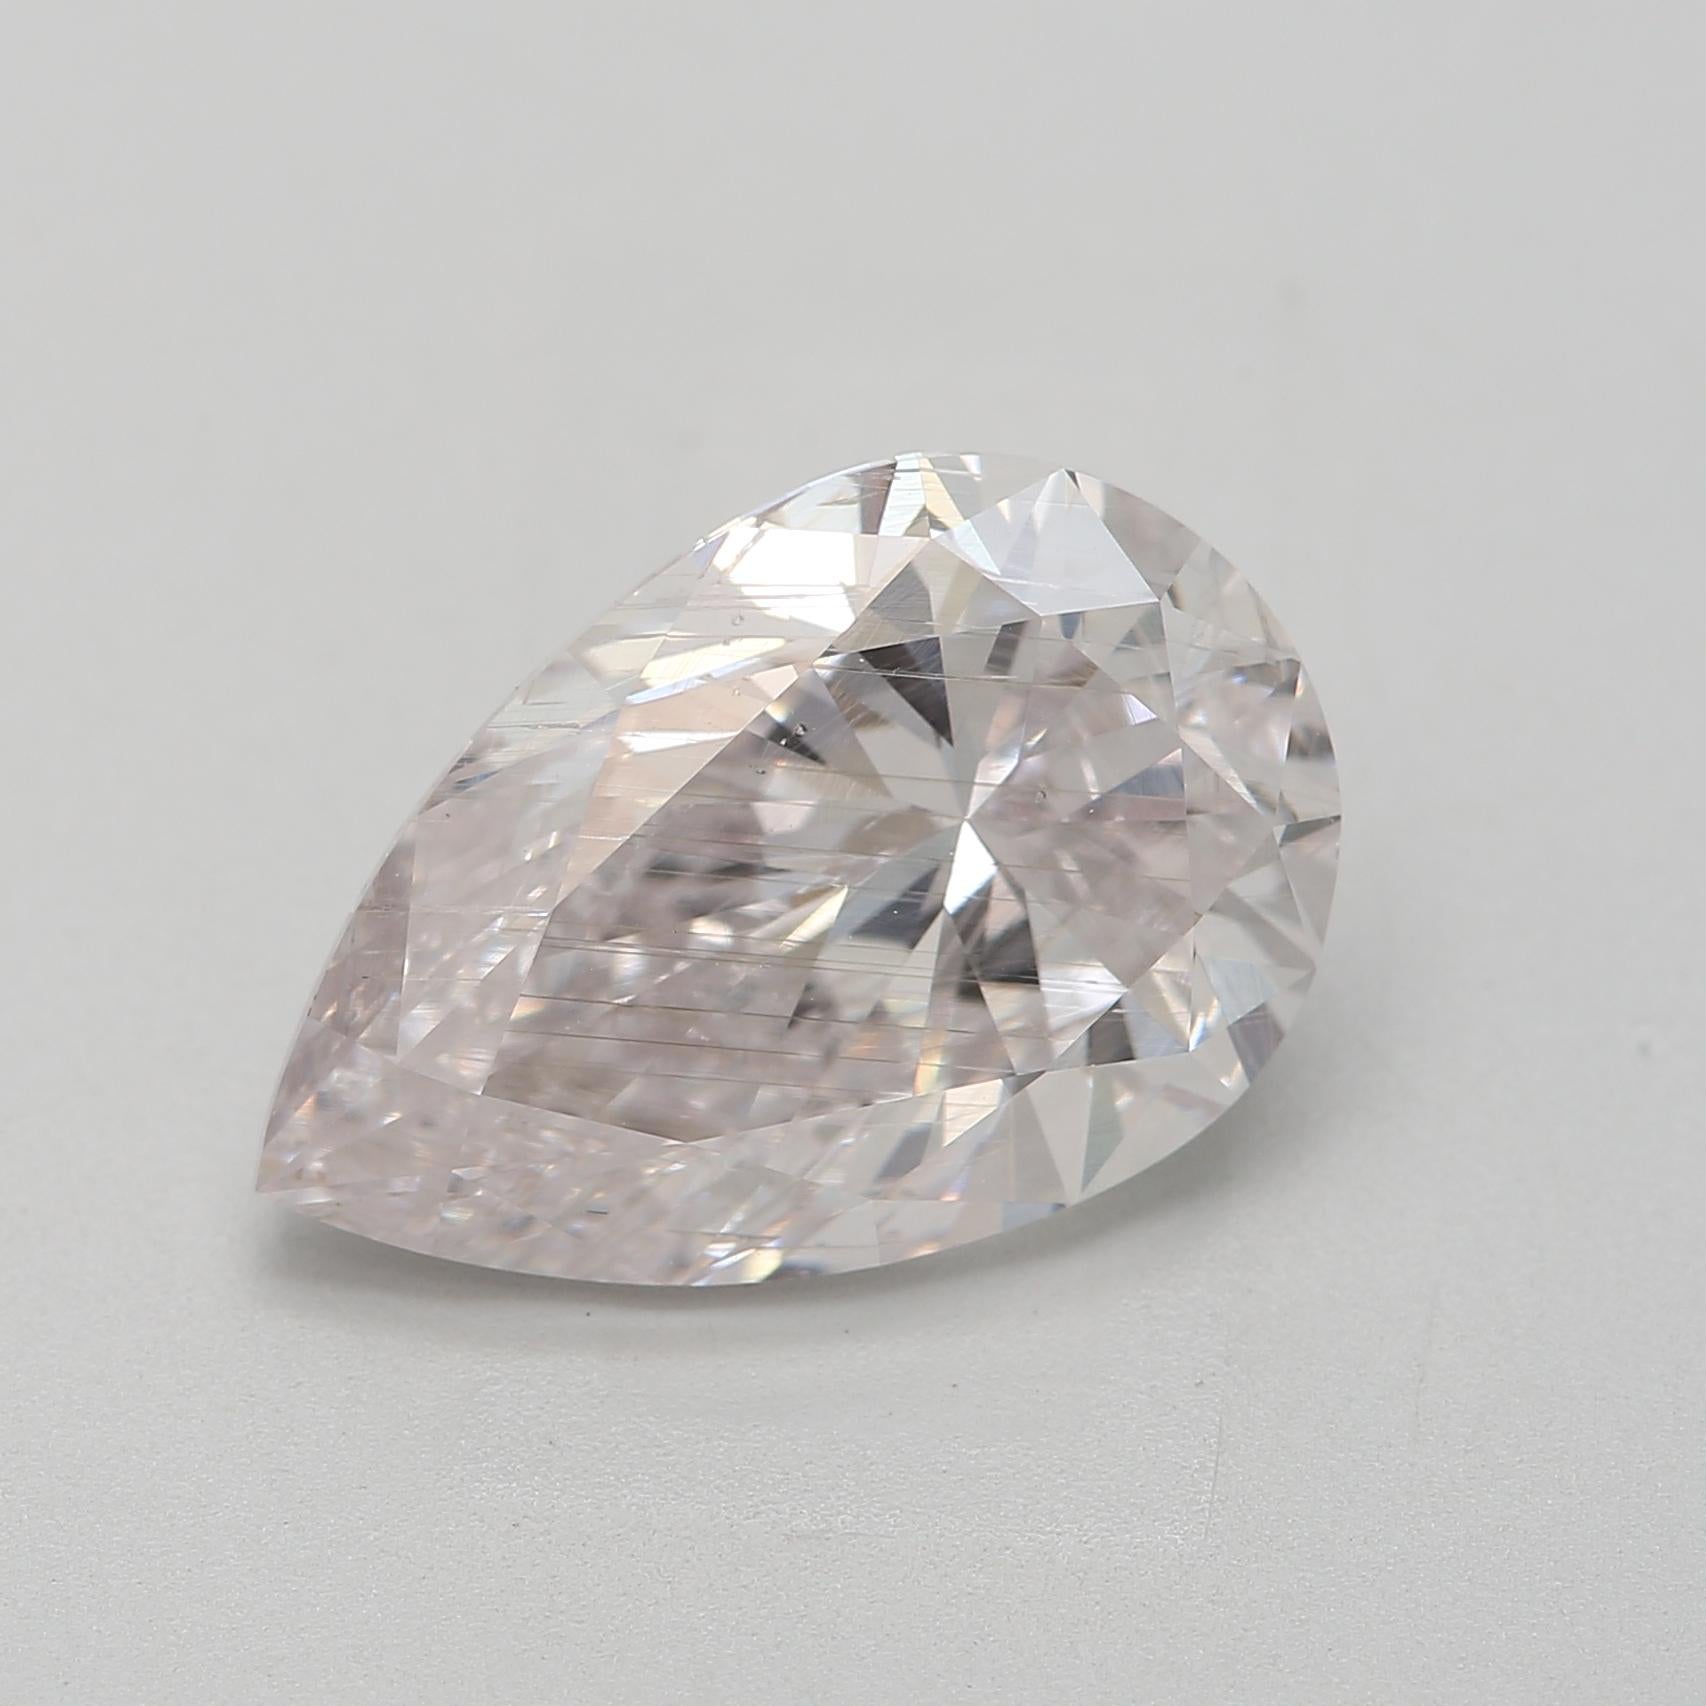 *100% NATURAL FANCY COLOUR DIAMOND*

✪ Diamond Details ✪

➛ Shape: Pear
➛ Colour Grade: Light Pink
➛ Carat: 3.00
➛ Clarity: I1
➛ GIA Certified 

^FEATURES OF THE DIAMOND^

This 3.0-carat diamond is a significant and valuable gemstone. The carat is a